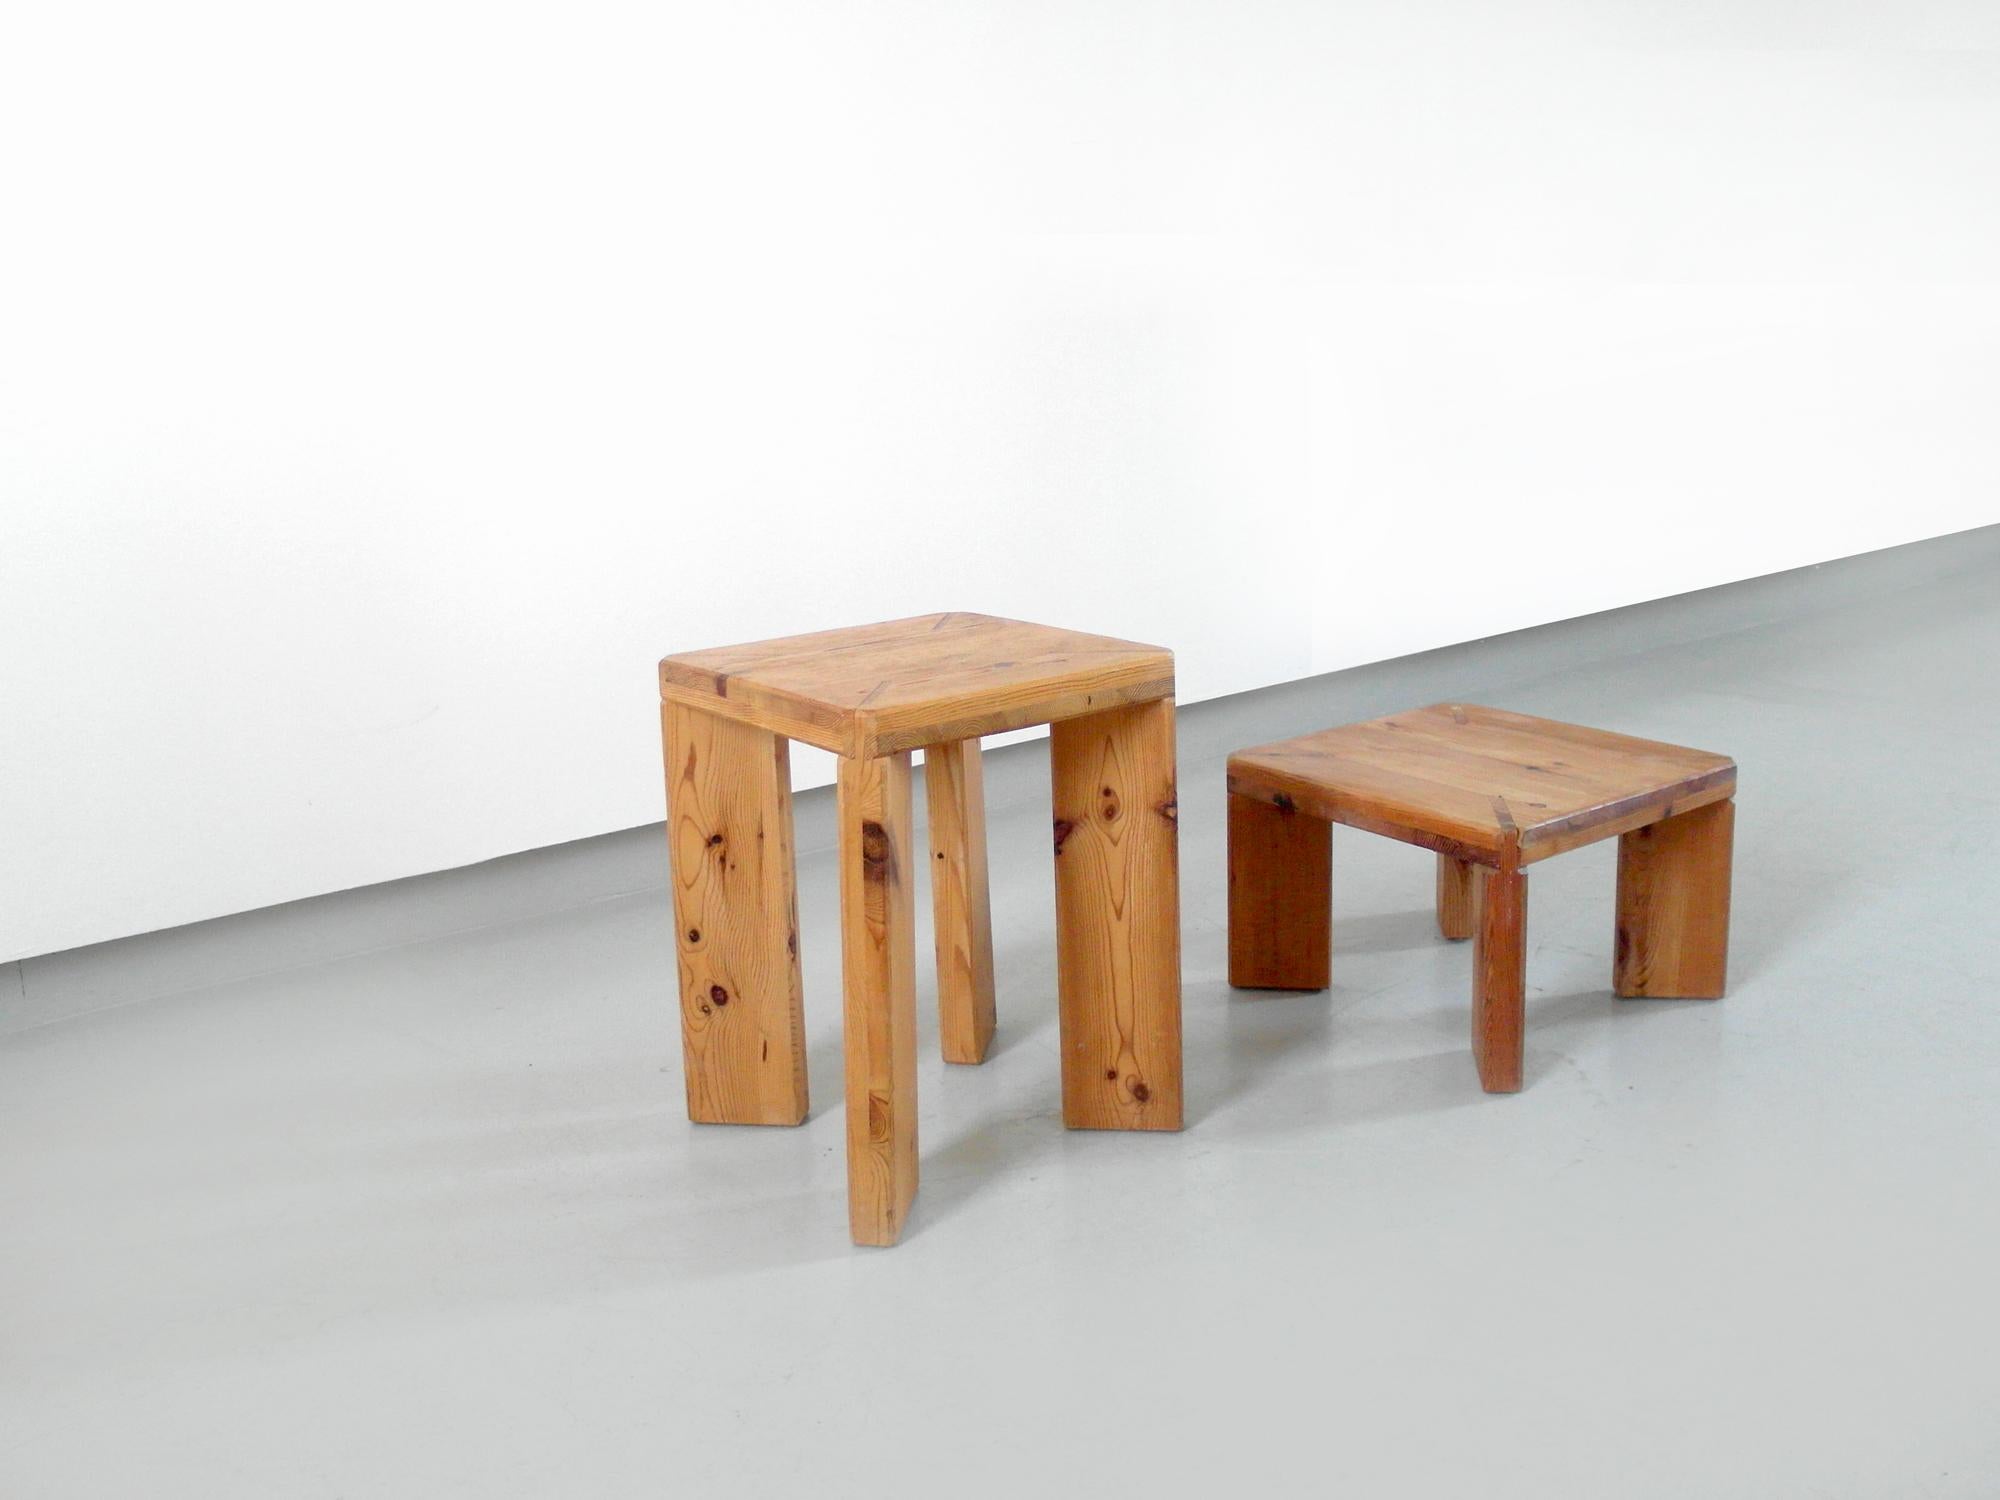 Swedish Roland Wilhelmsson, Unique Pair of Signed Stools, Studio of Artist 1965 and 1970 For Sale